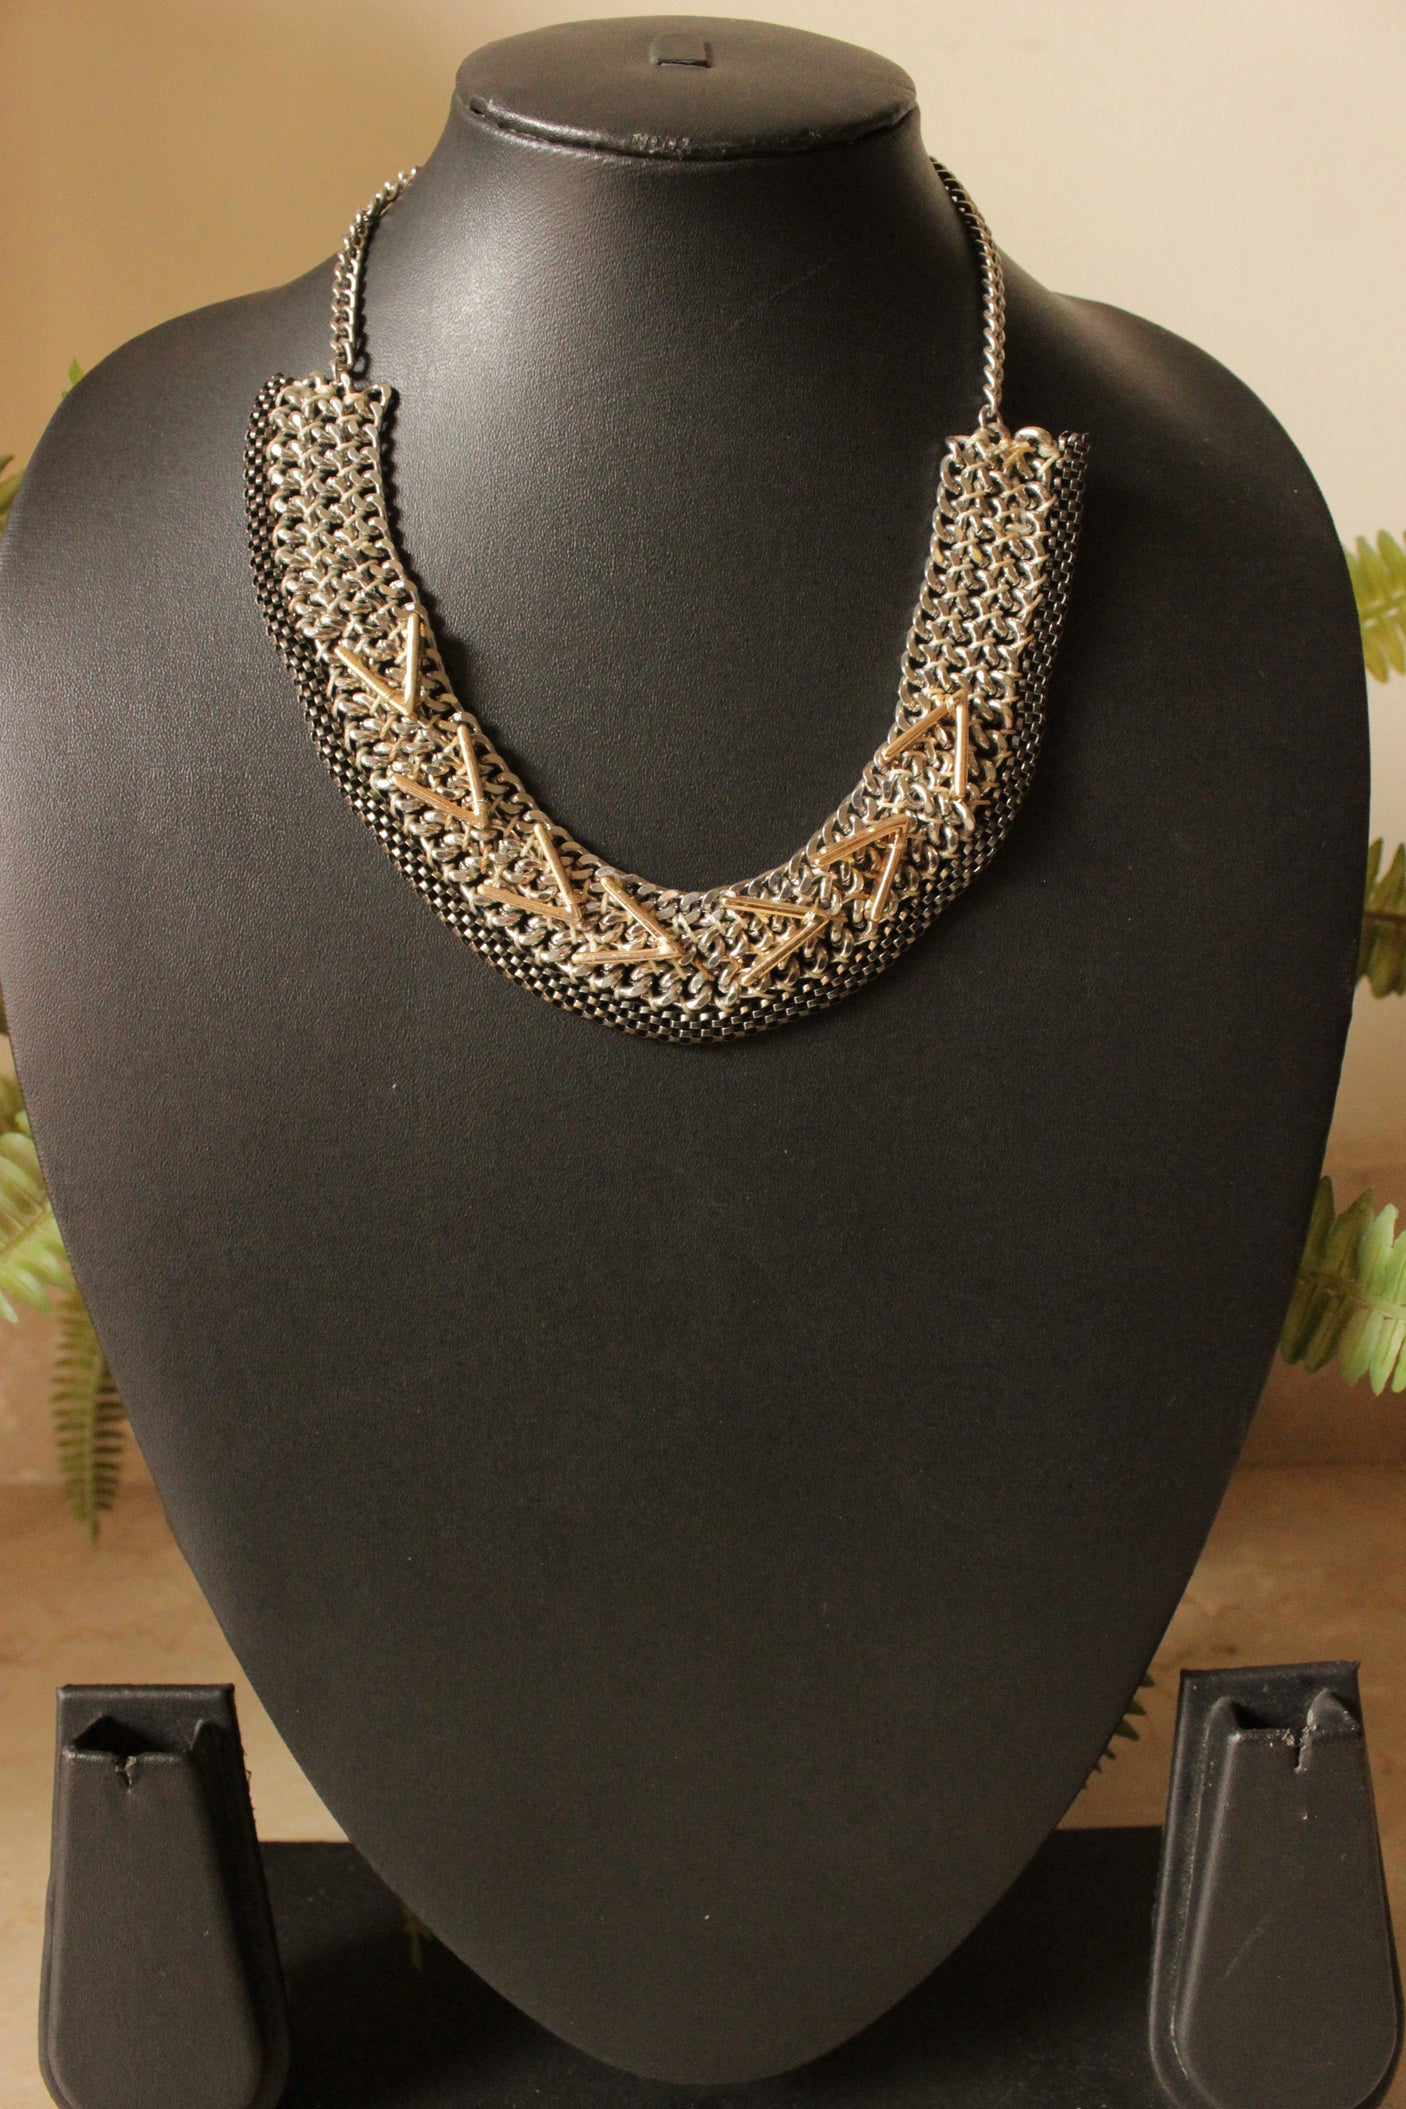 Metal Chains 4 Layer Adjustable Closure Necklace